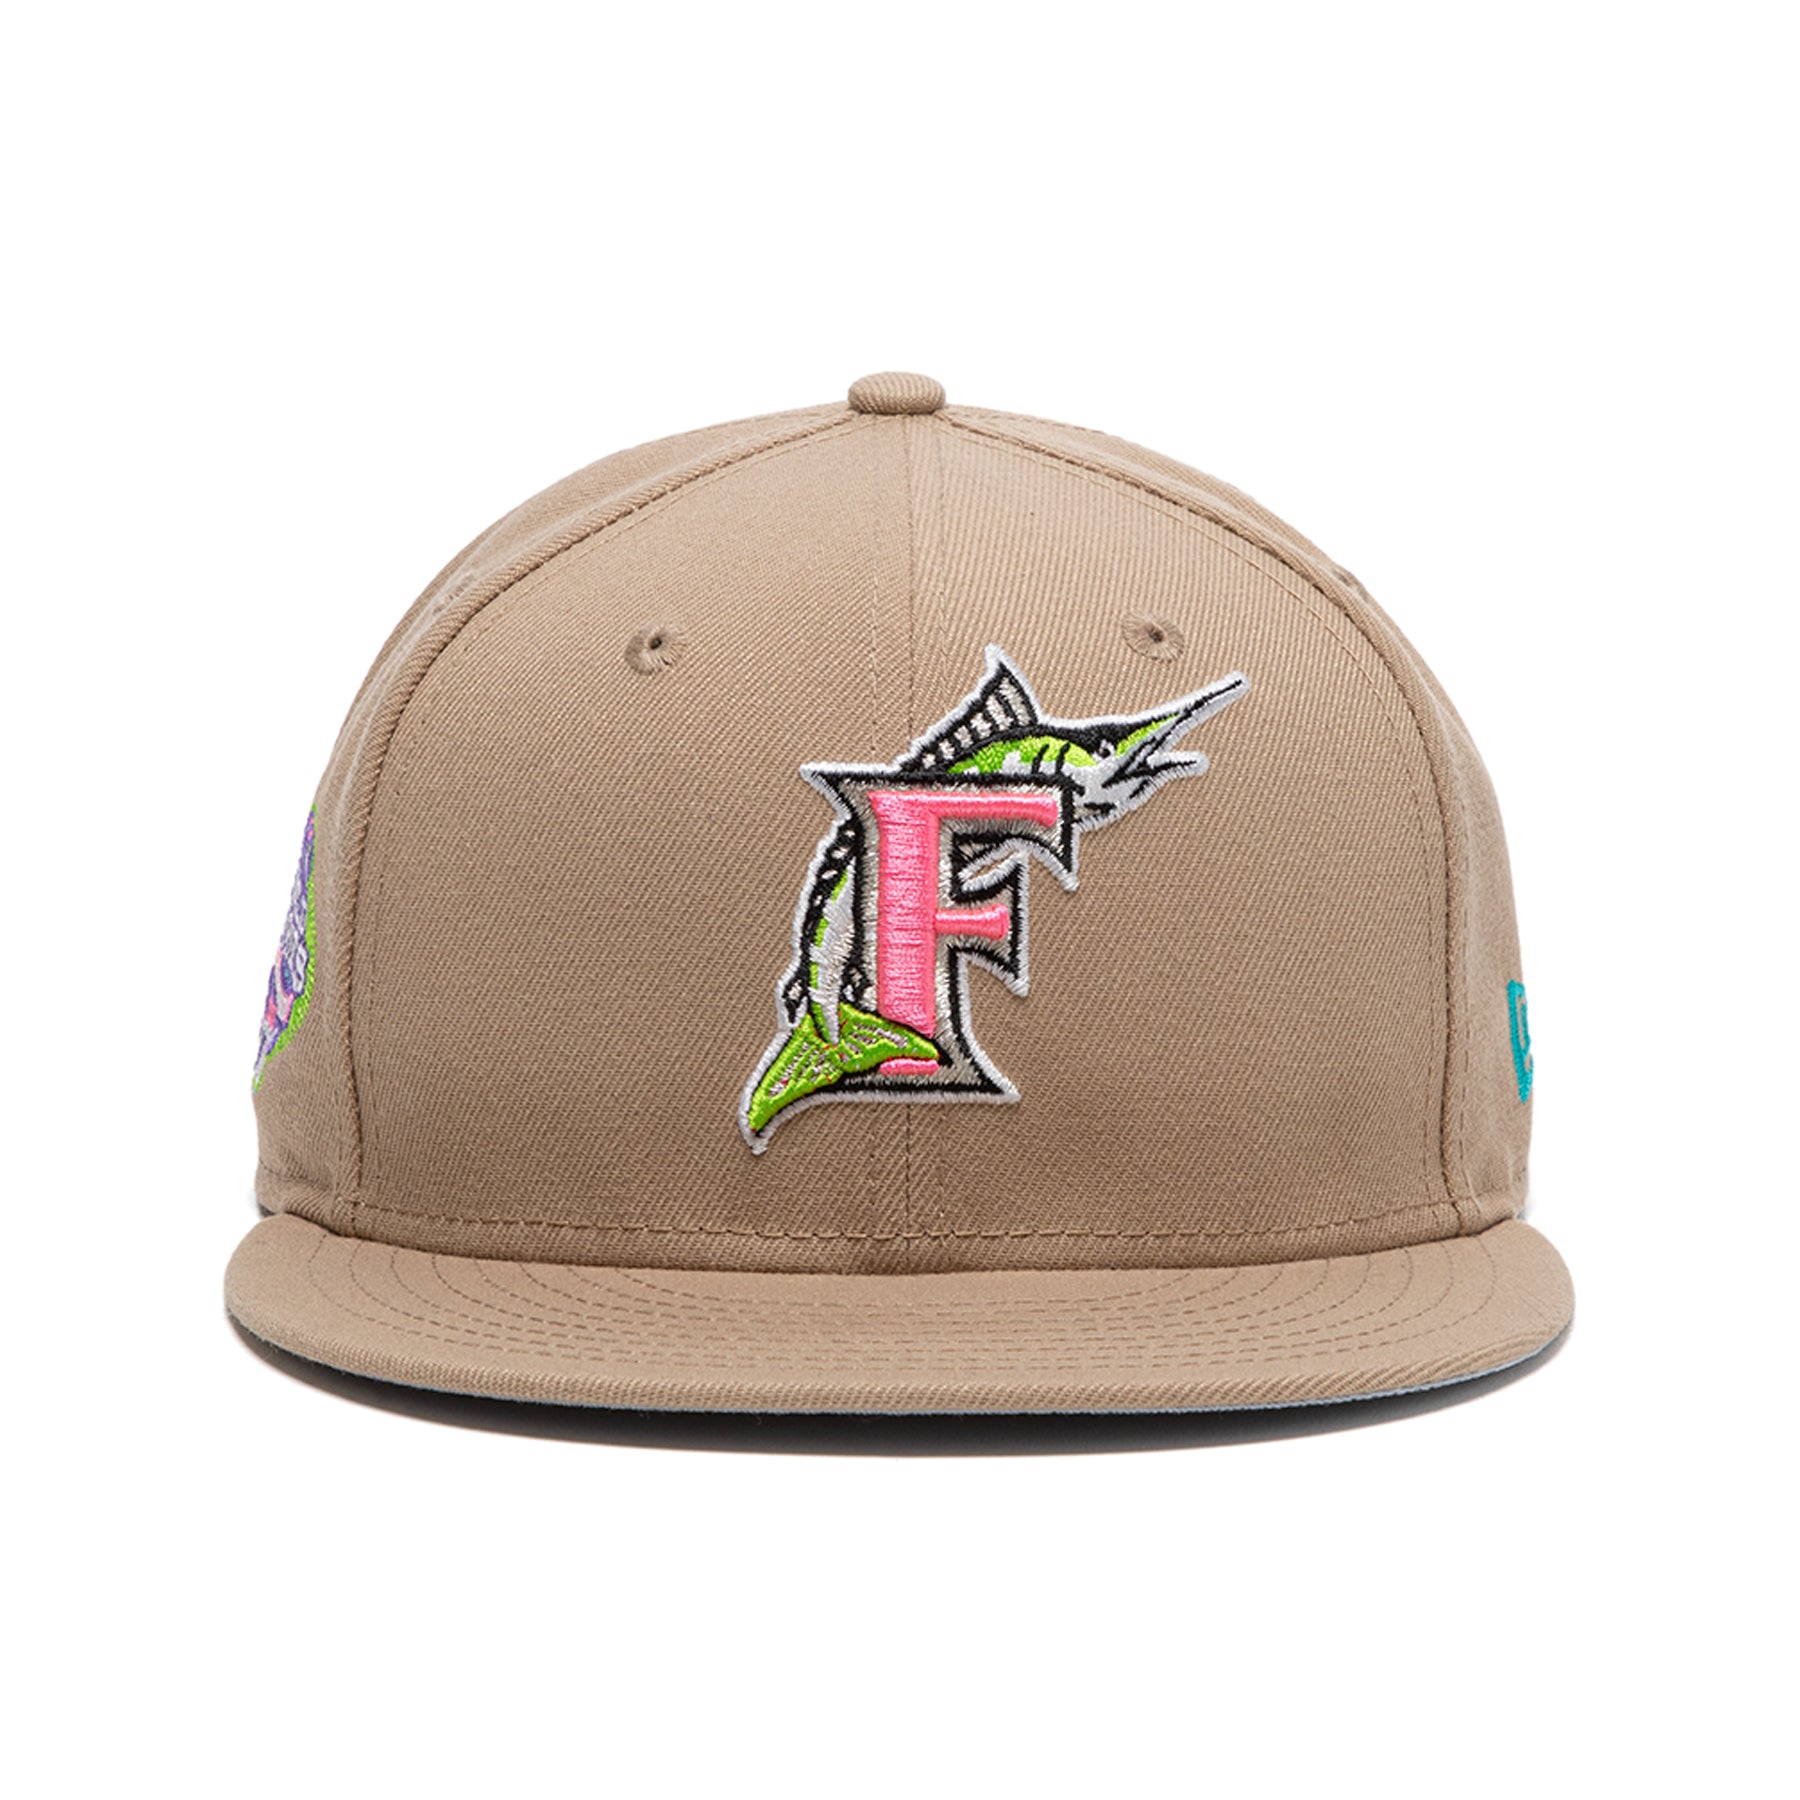 Concepts x New Era 59FIFTY Florida Marlins Fitted Hat (Camel/Grey) 7 1/4